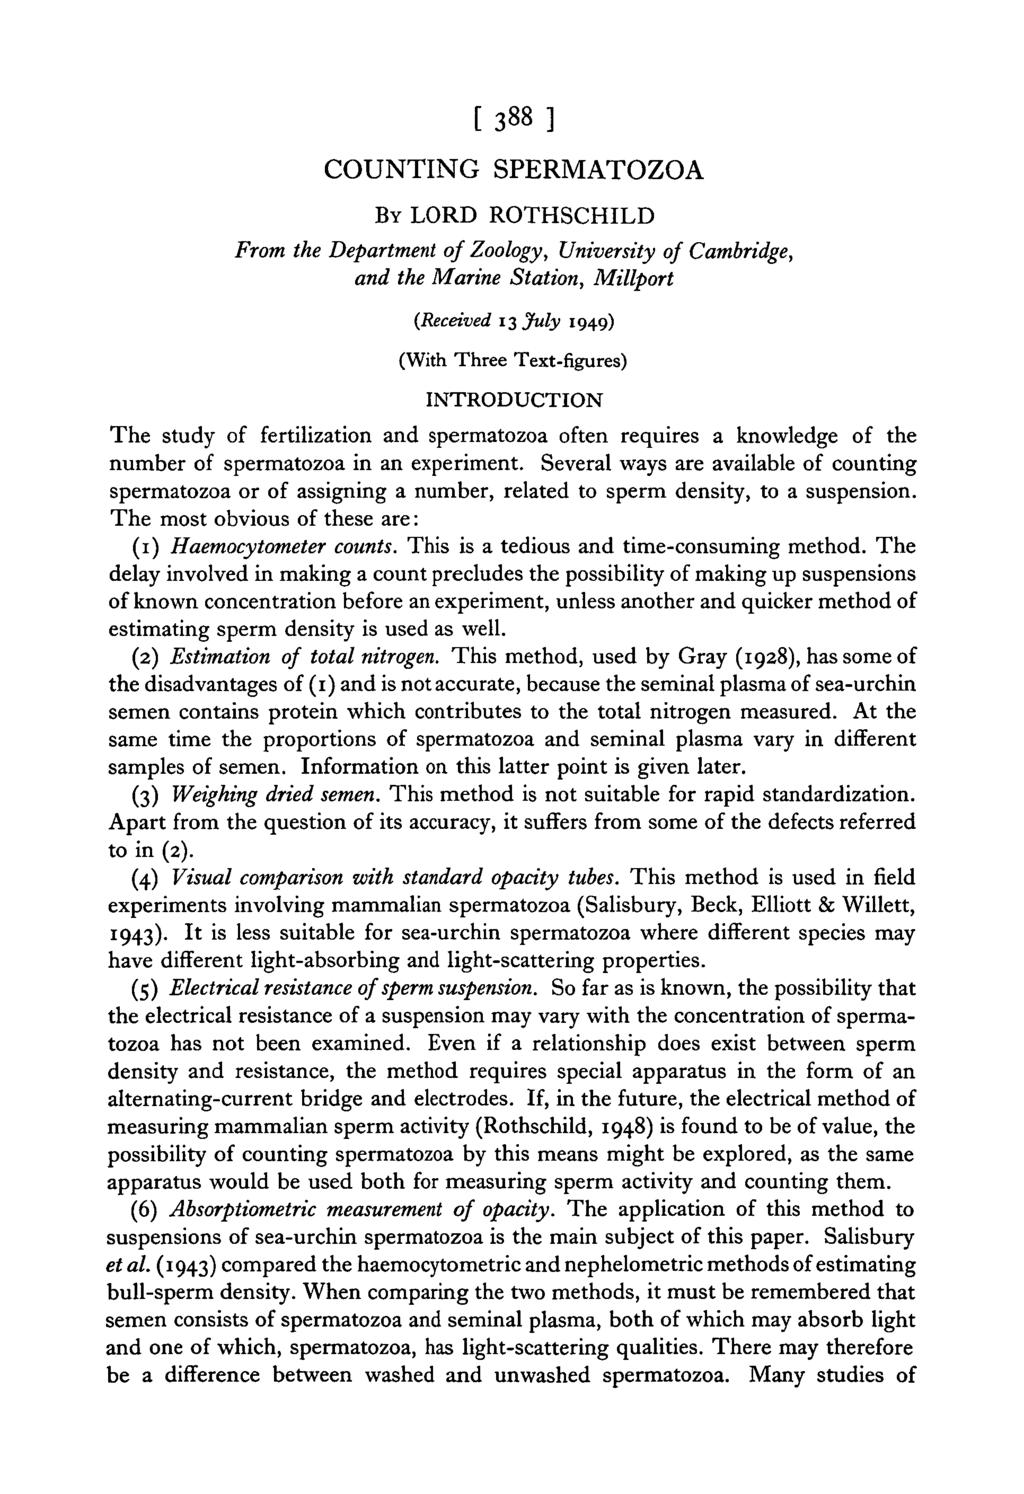 [388] COUNTING SPERMATOZOA BY LORD ROTHSCHILD From the Department of Zoology, University of Cambridge, and the Marine Station, Millport (Received 13 July 1949) (With Three Text-figures) INTRODUCTION